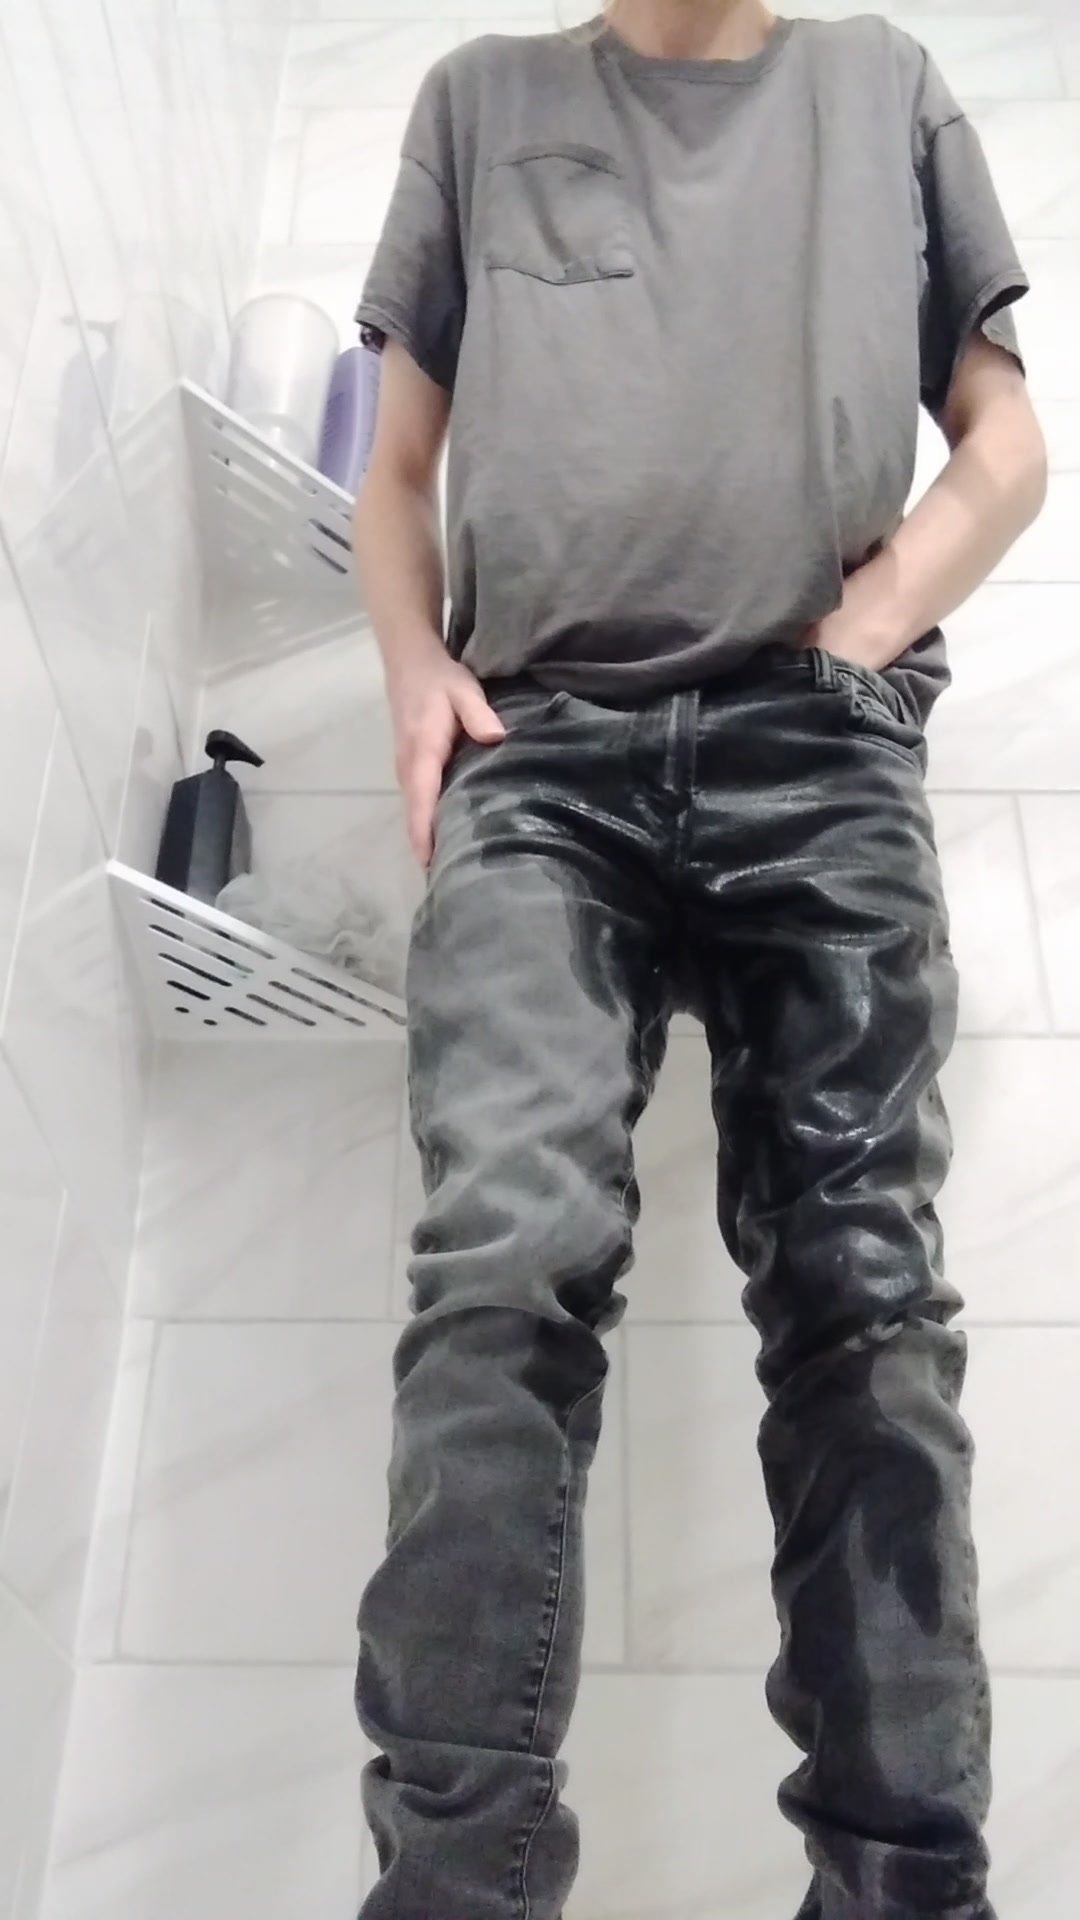 A morning soaking in my jeans with hot piss